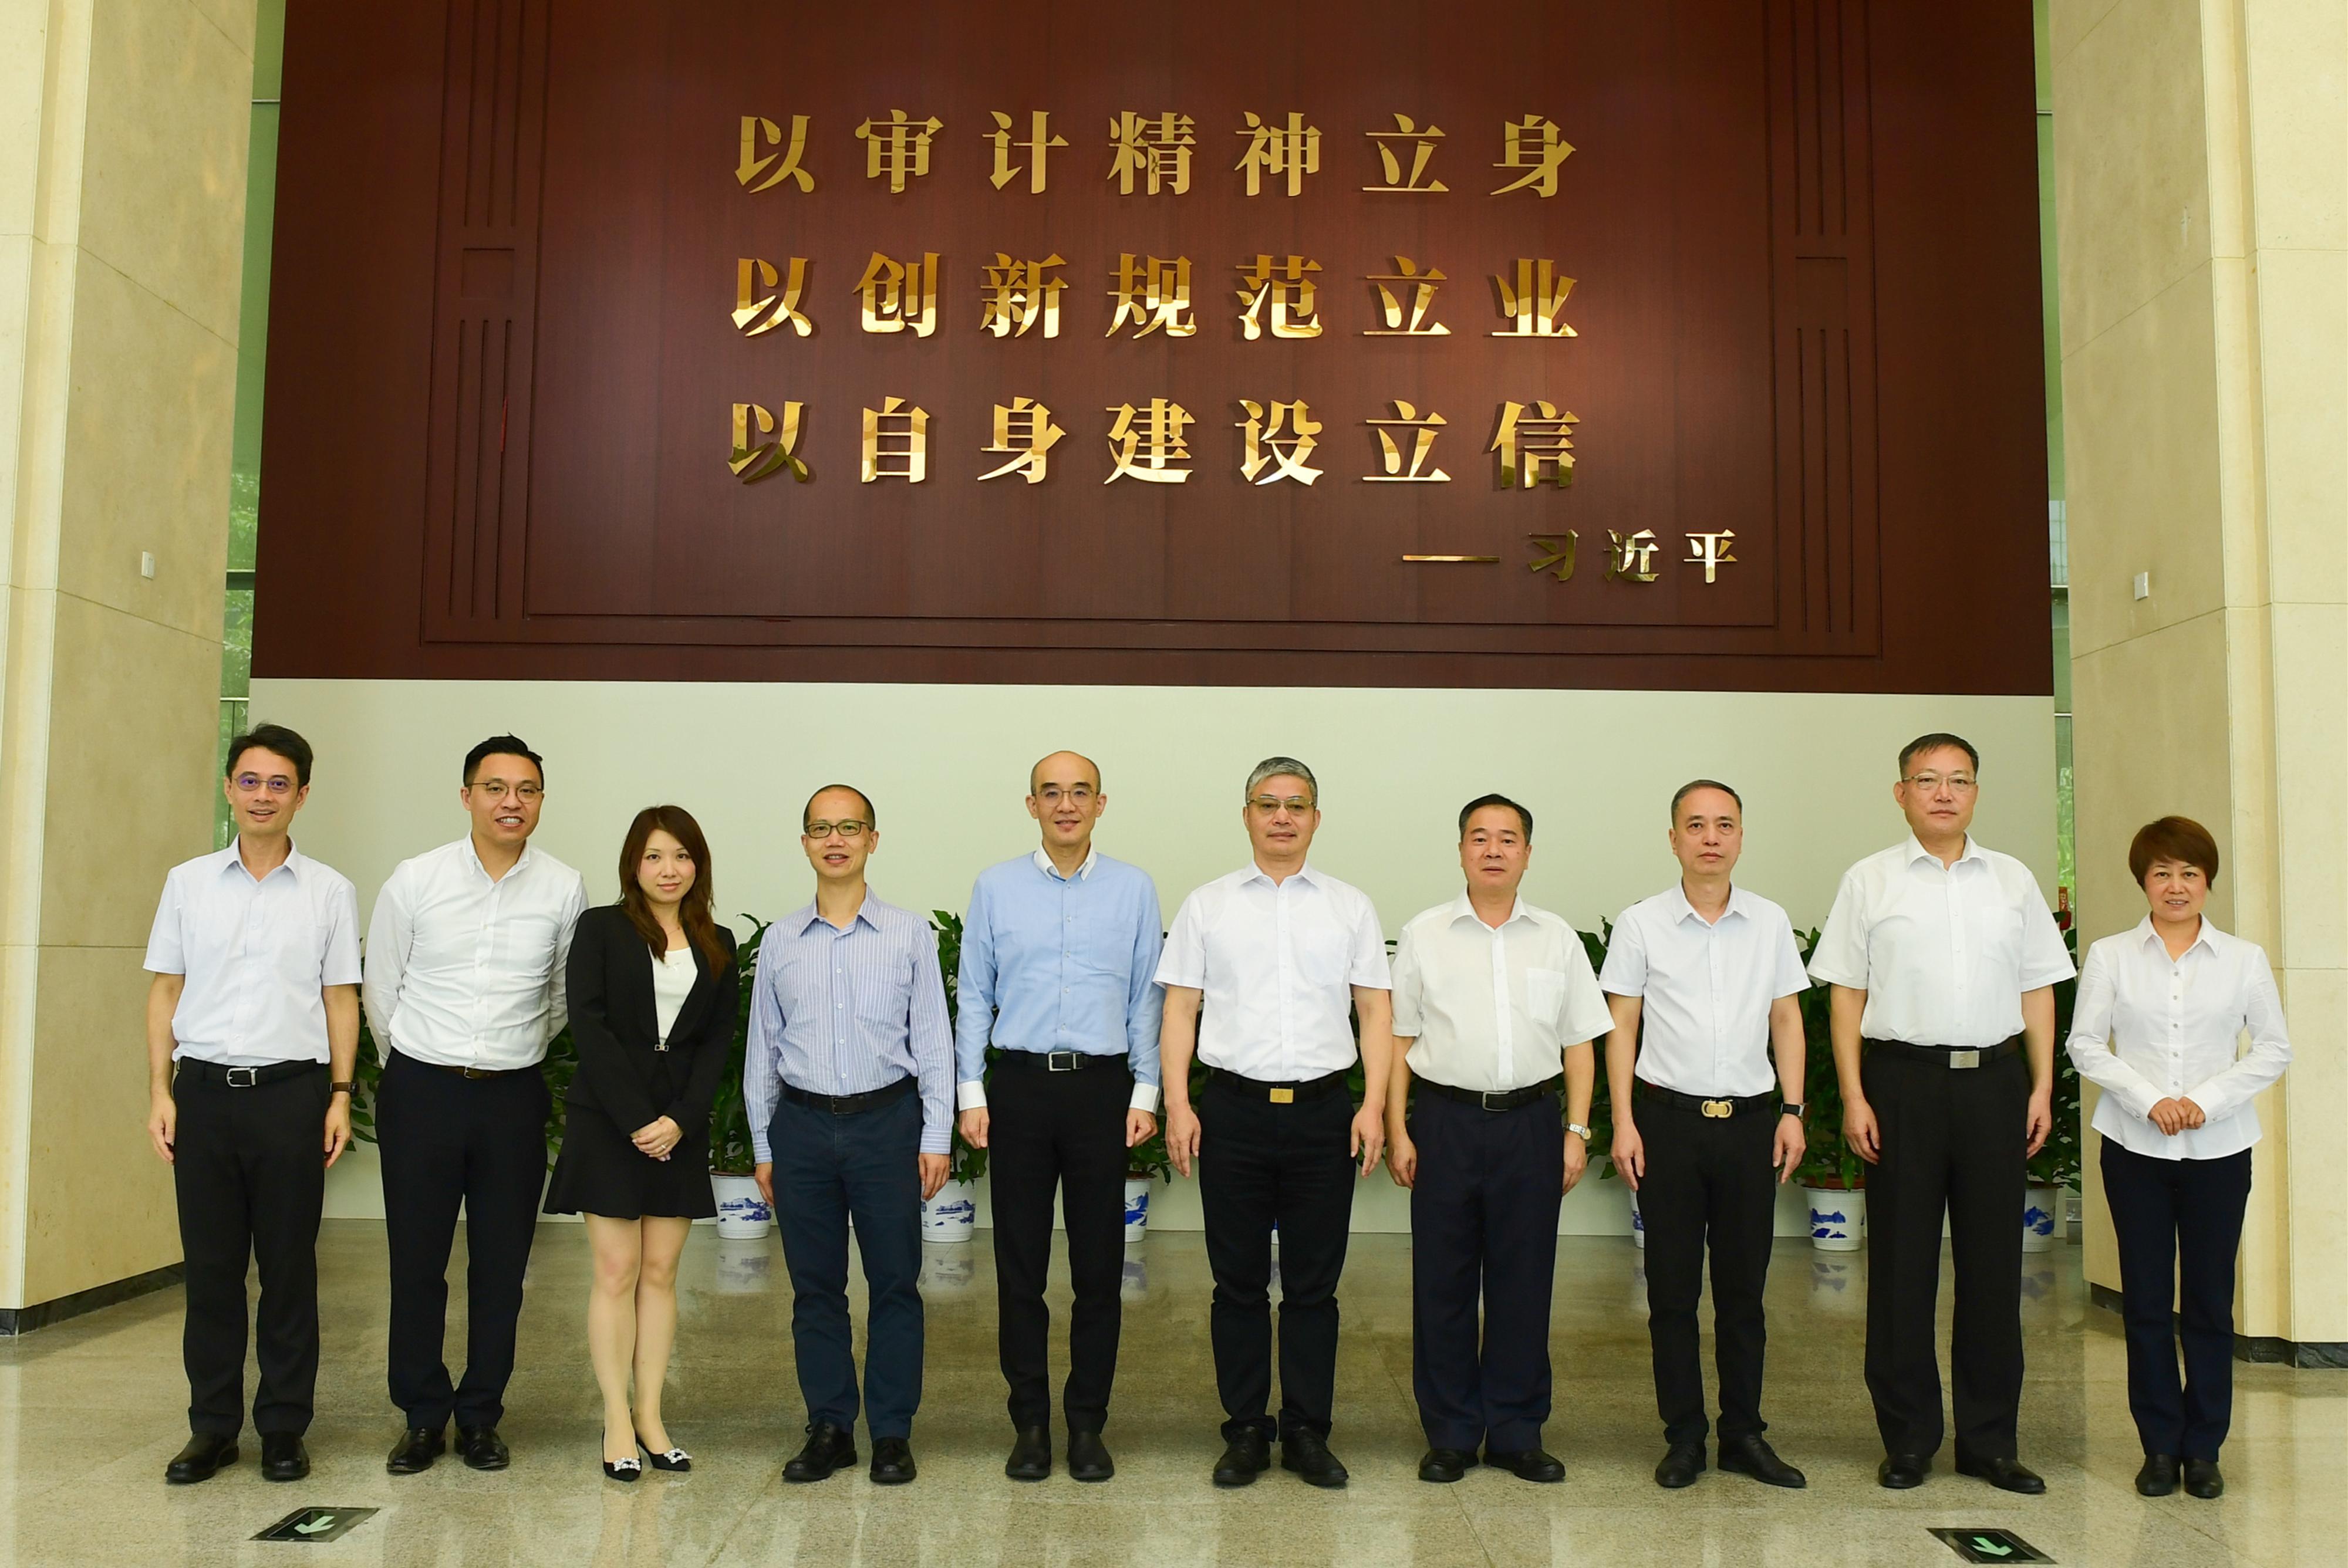 The Director of Audit, Professor Nelson Lam, led a delegation of the Audit Commission on July 6 for a three-day visit to three cities in the Greater Bay Area, namely Guangzhou, Zhuhai and Shenzhen. Photo shows the delegation of the Audit Commission meeting with officials of the Audit Office of Guangdong Province.